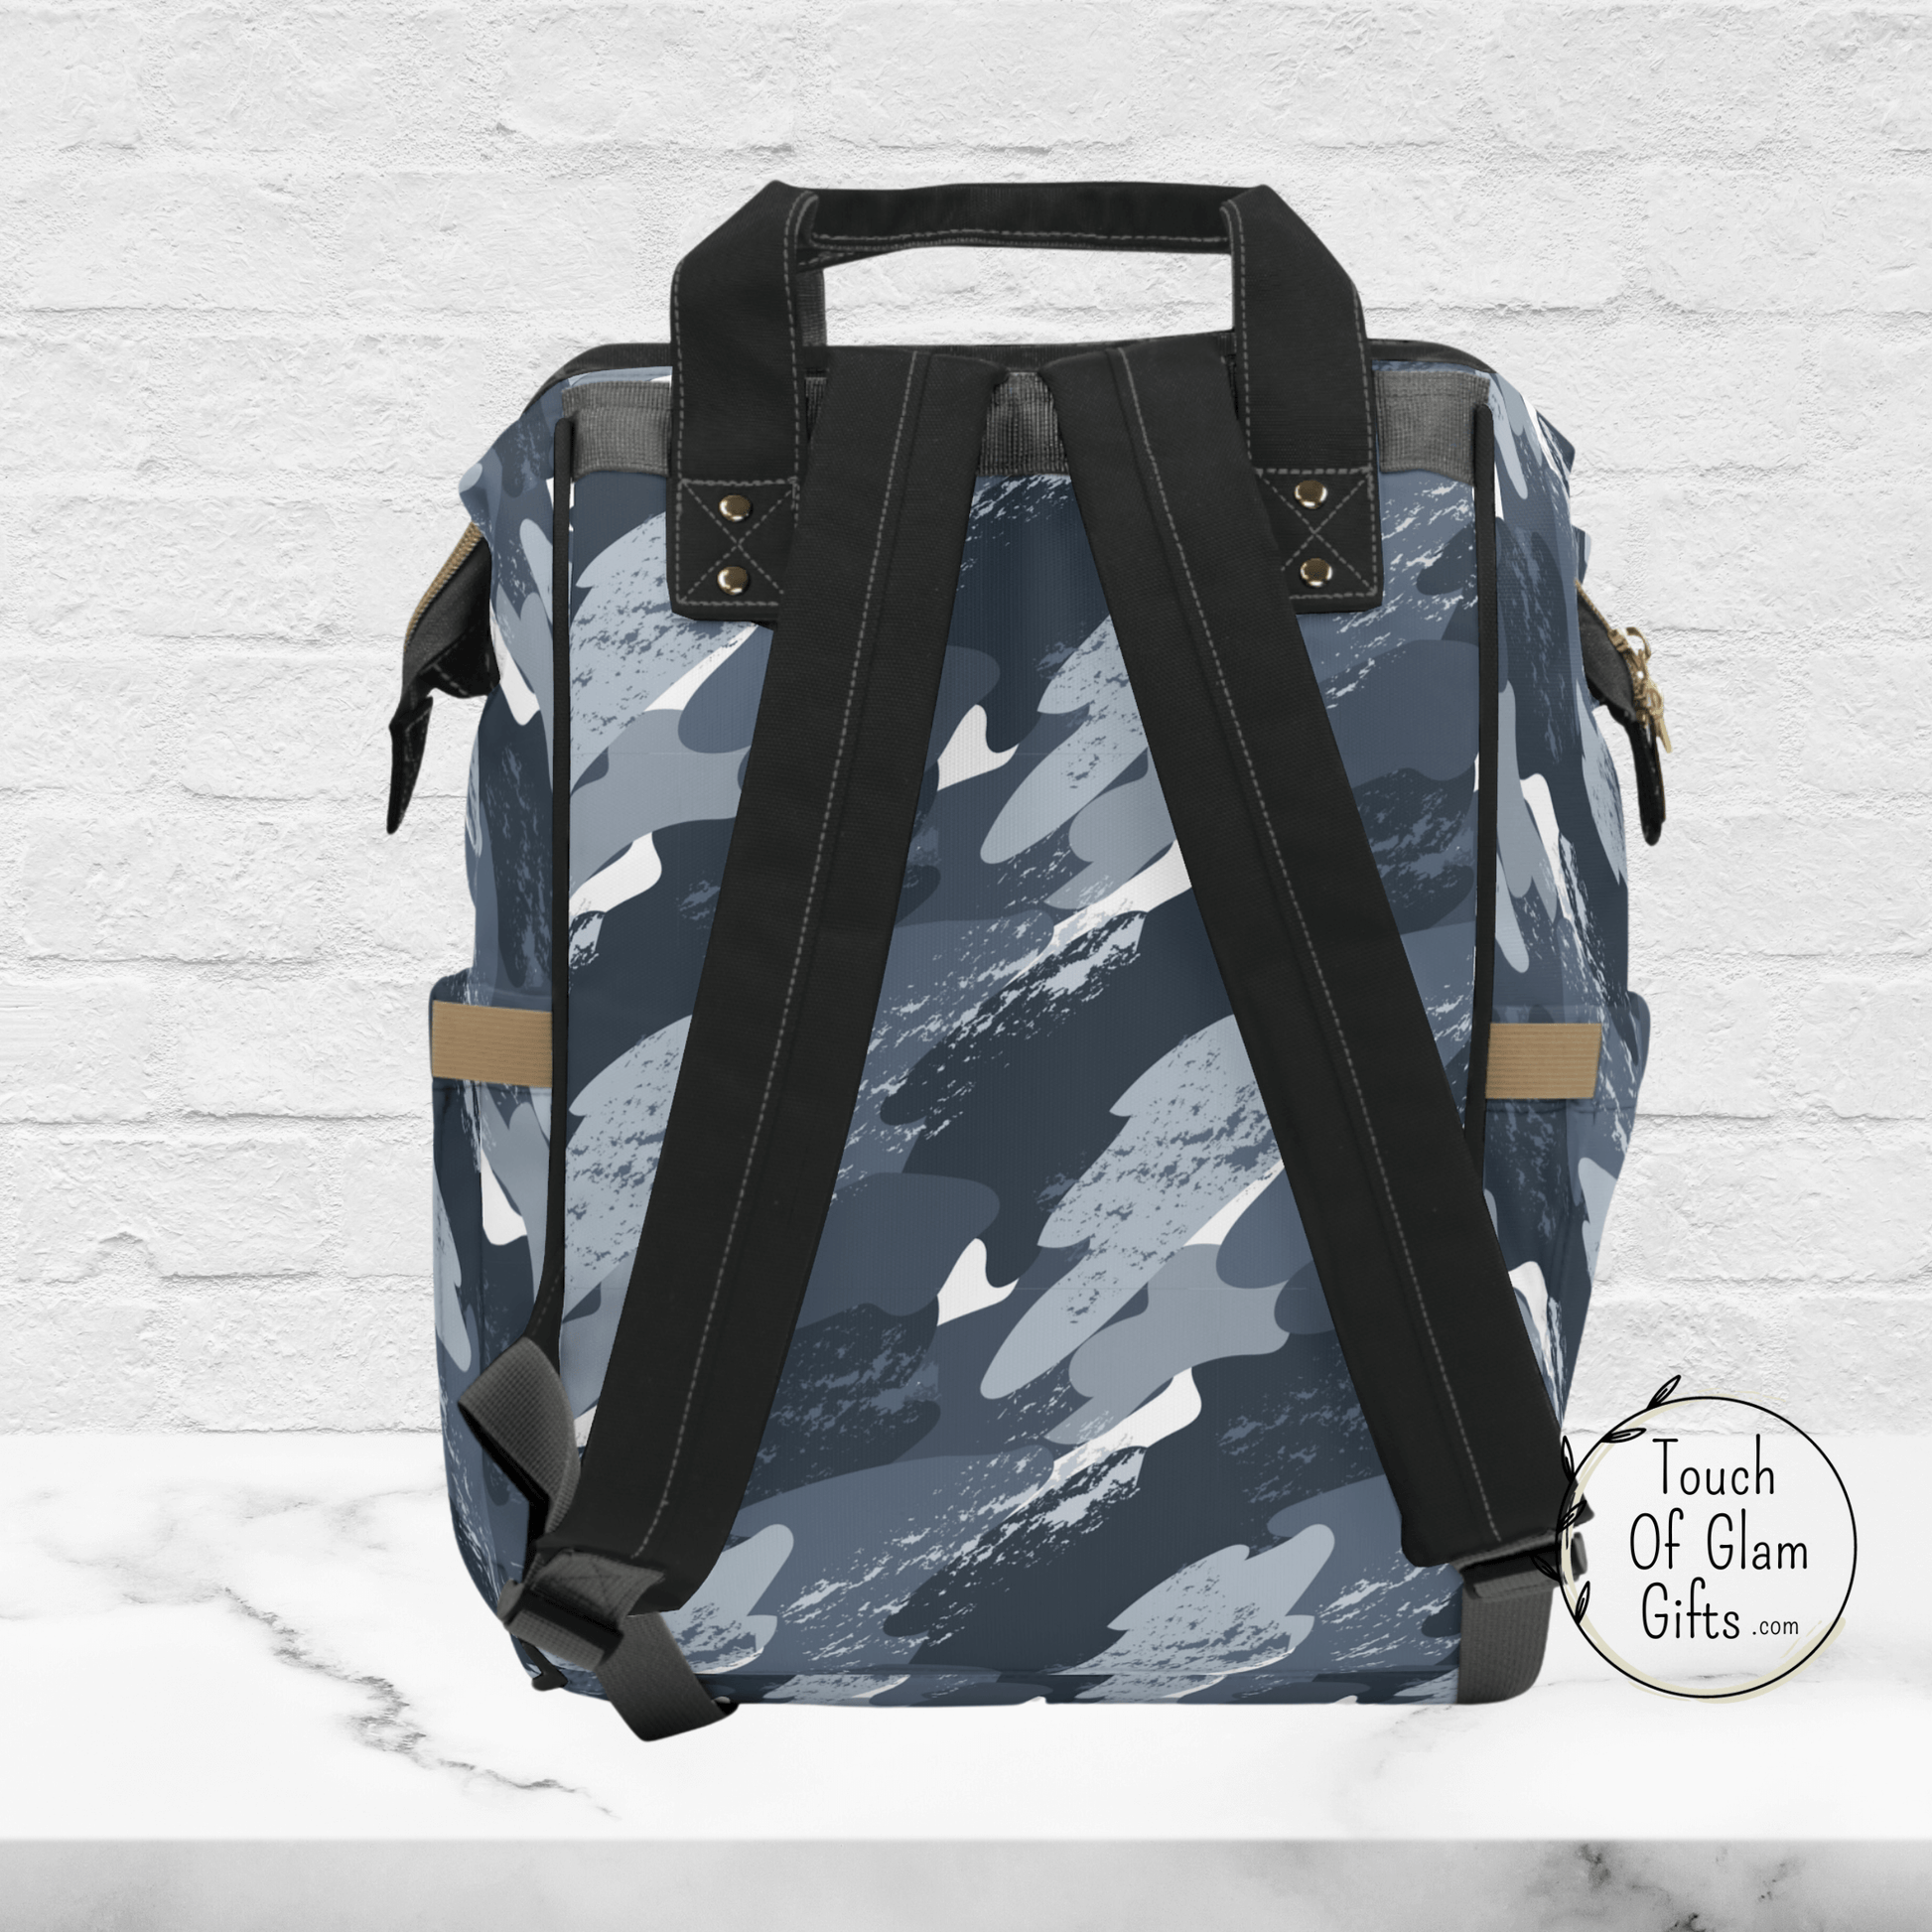 The back view of our dad life blue camo diaper bag shows the black adjustable, padded straps and black carrying handle on the top. This bag has details with black piping and is a large diaper backpack to hold kids stuff and a laptop too.